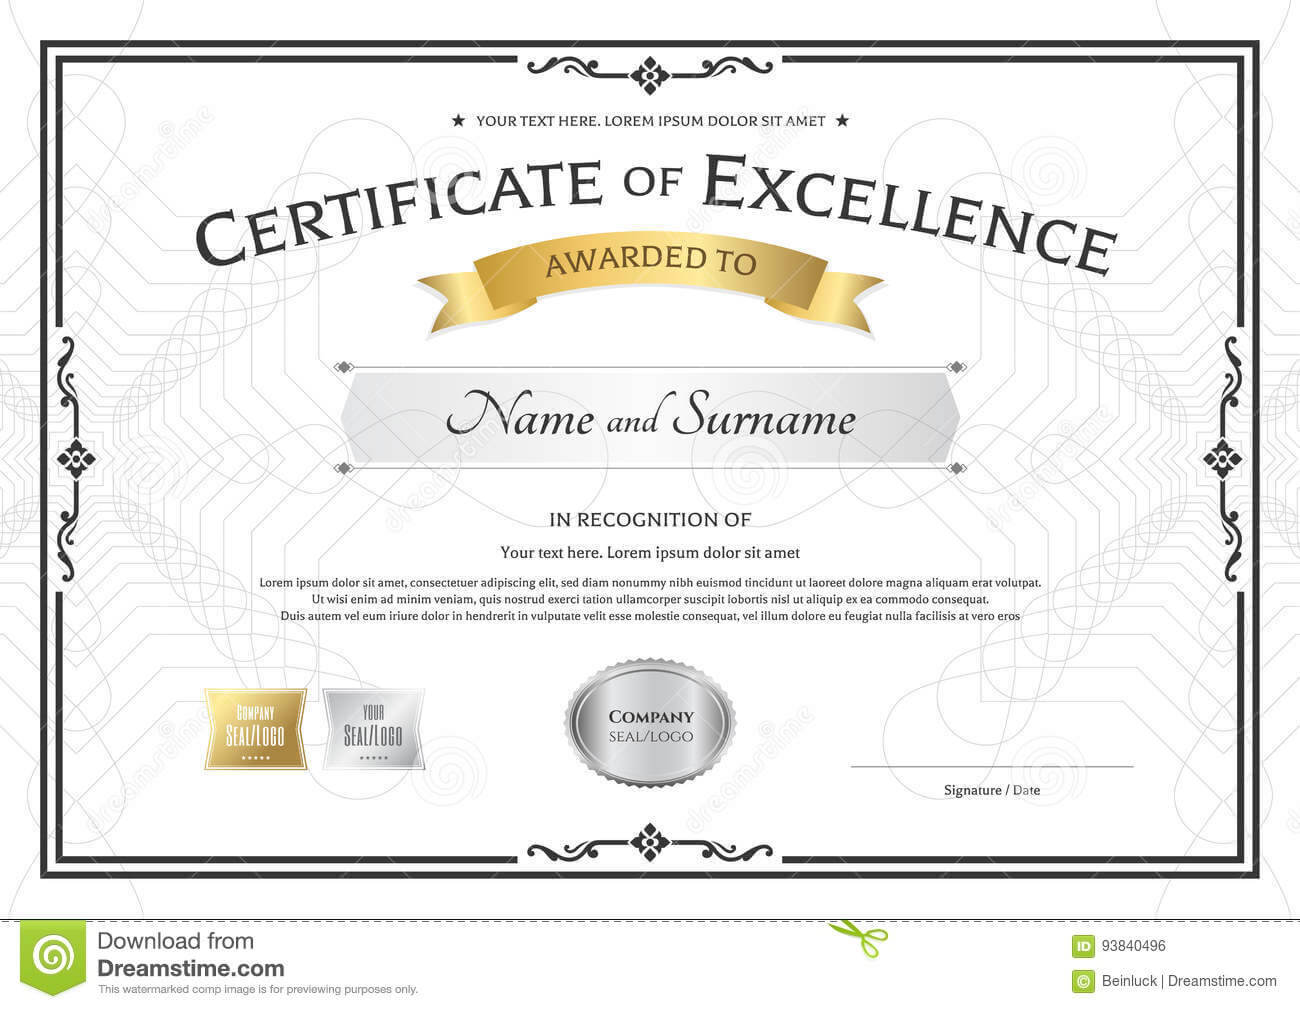 Certificate Of Excellence Template With Gold Award Ribbon On Within Certificate Of Excellence Template Free Download